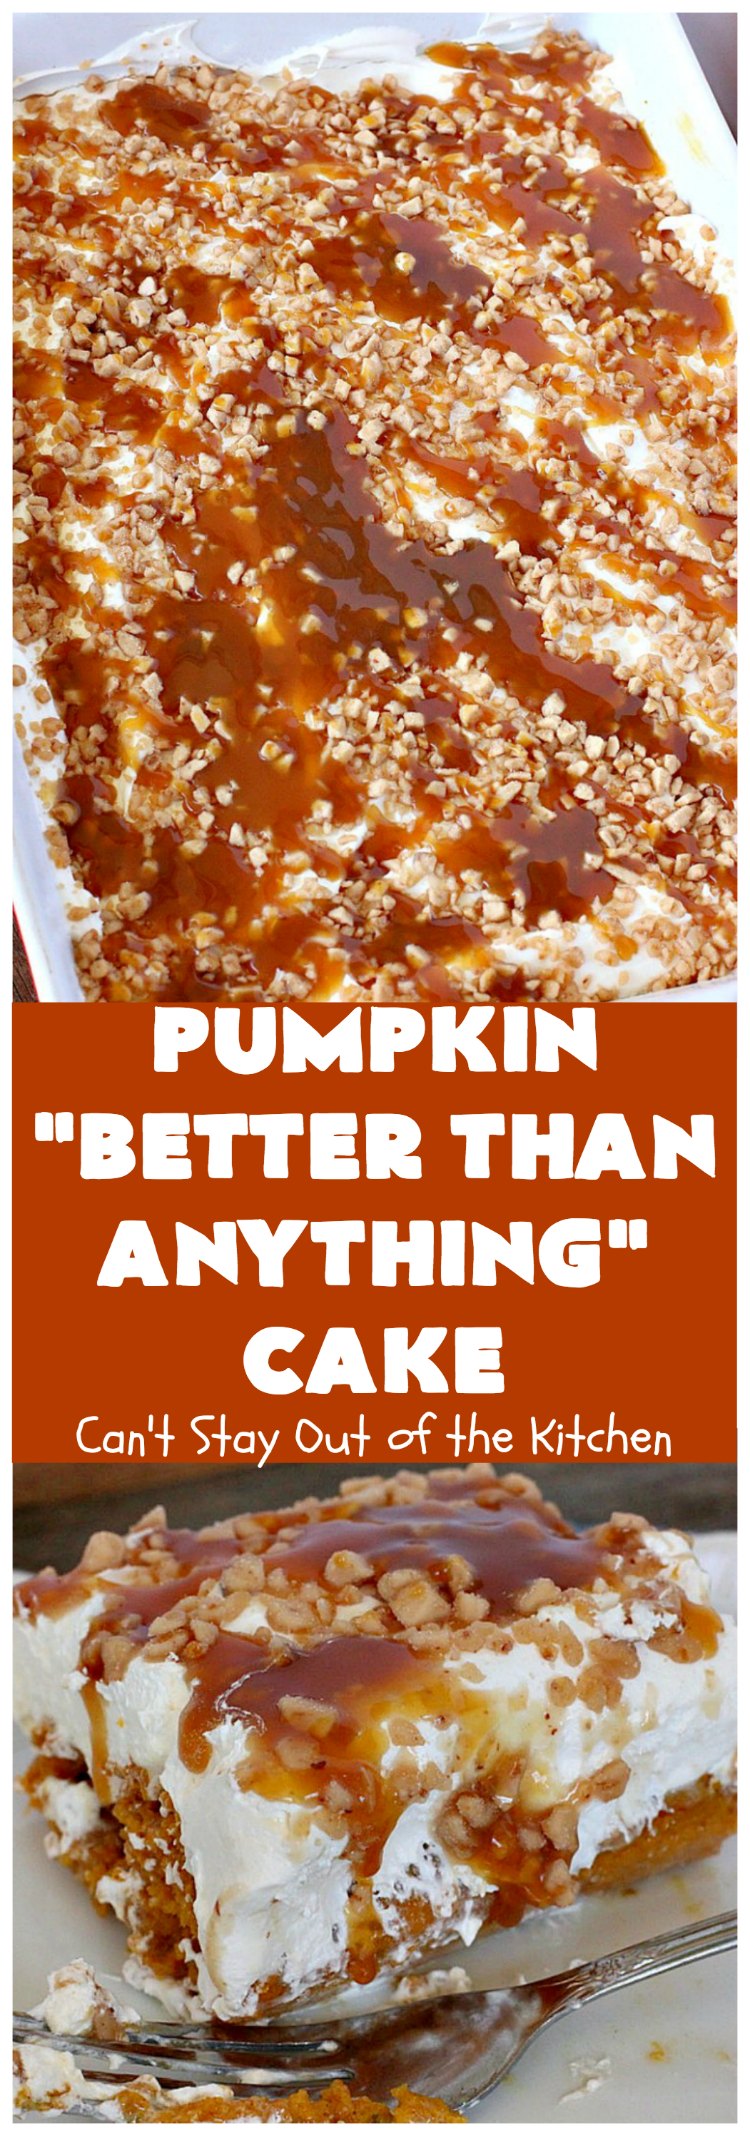 Pumpkin Better-Than-Anything Cake | Can't Stay Out of the Kitchen